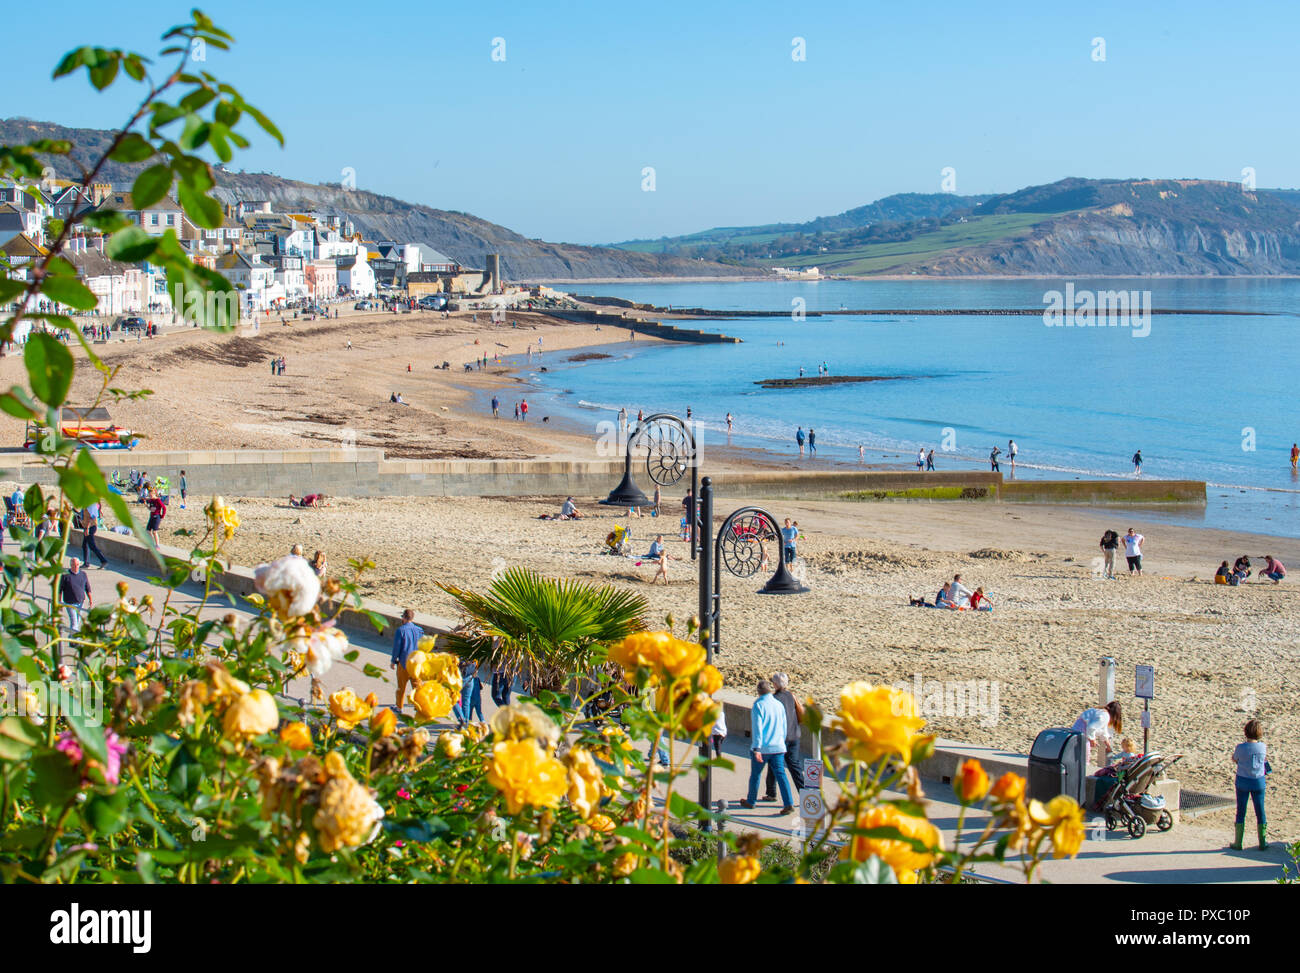 Lyme Regis, Dorset, UK. 21st October 2018.  UK Weather:  Unseasonably warm weekend sunshine and clear blue skies at Lyme Regis. Britain enjoys one last sunny weekend before chillier, wintery conditions arrive and temperatures plummet later in the week. Credit: Celia McMahon/Alamy Live News Stock Photo